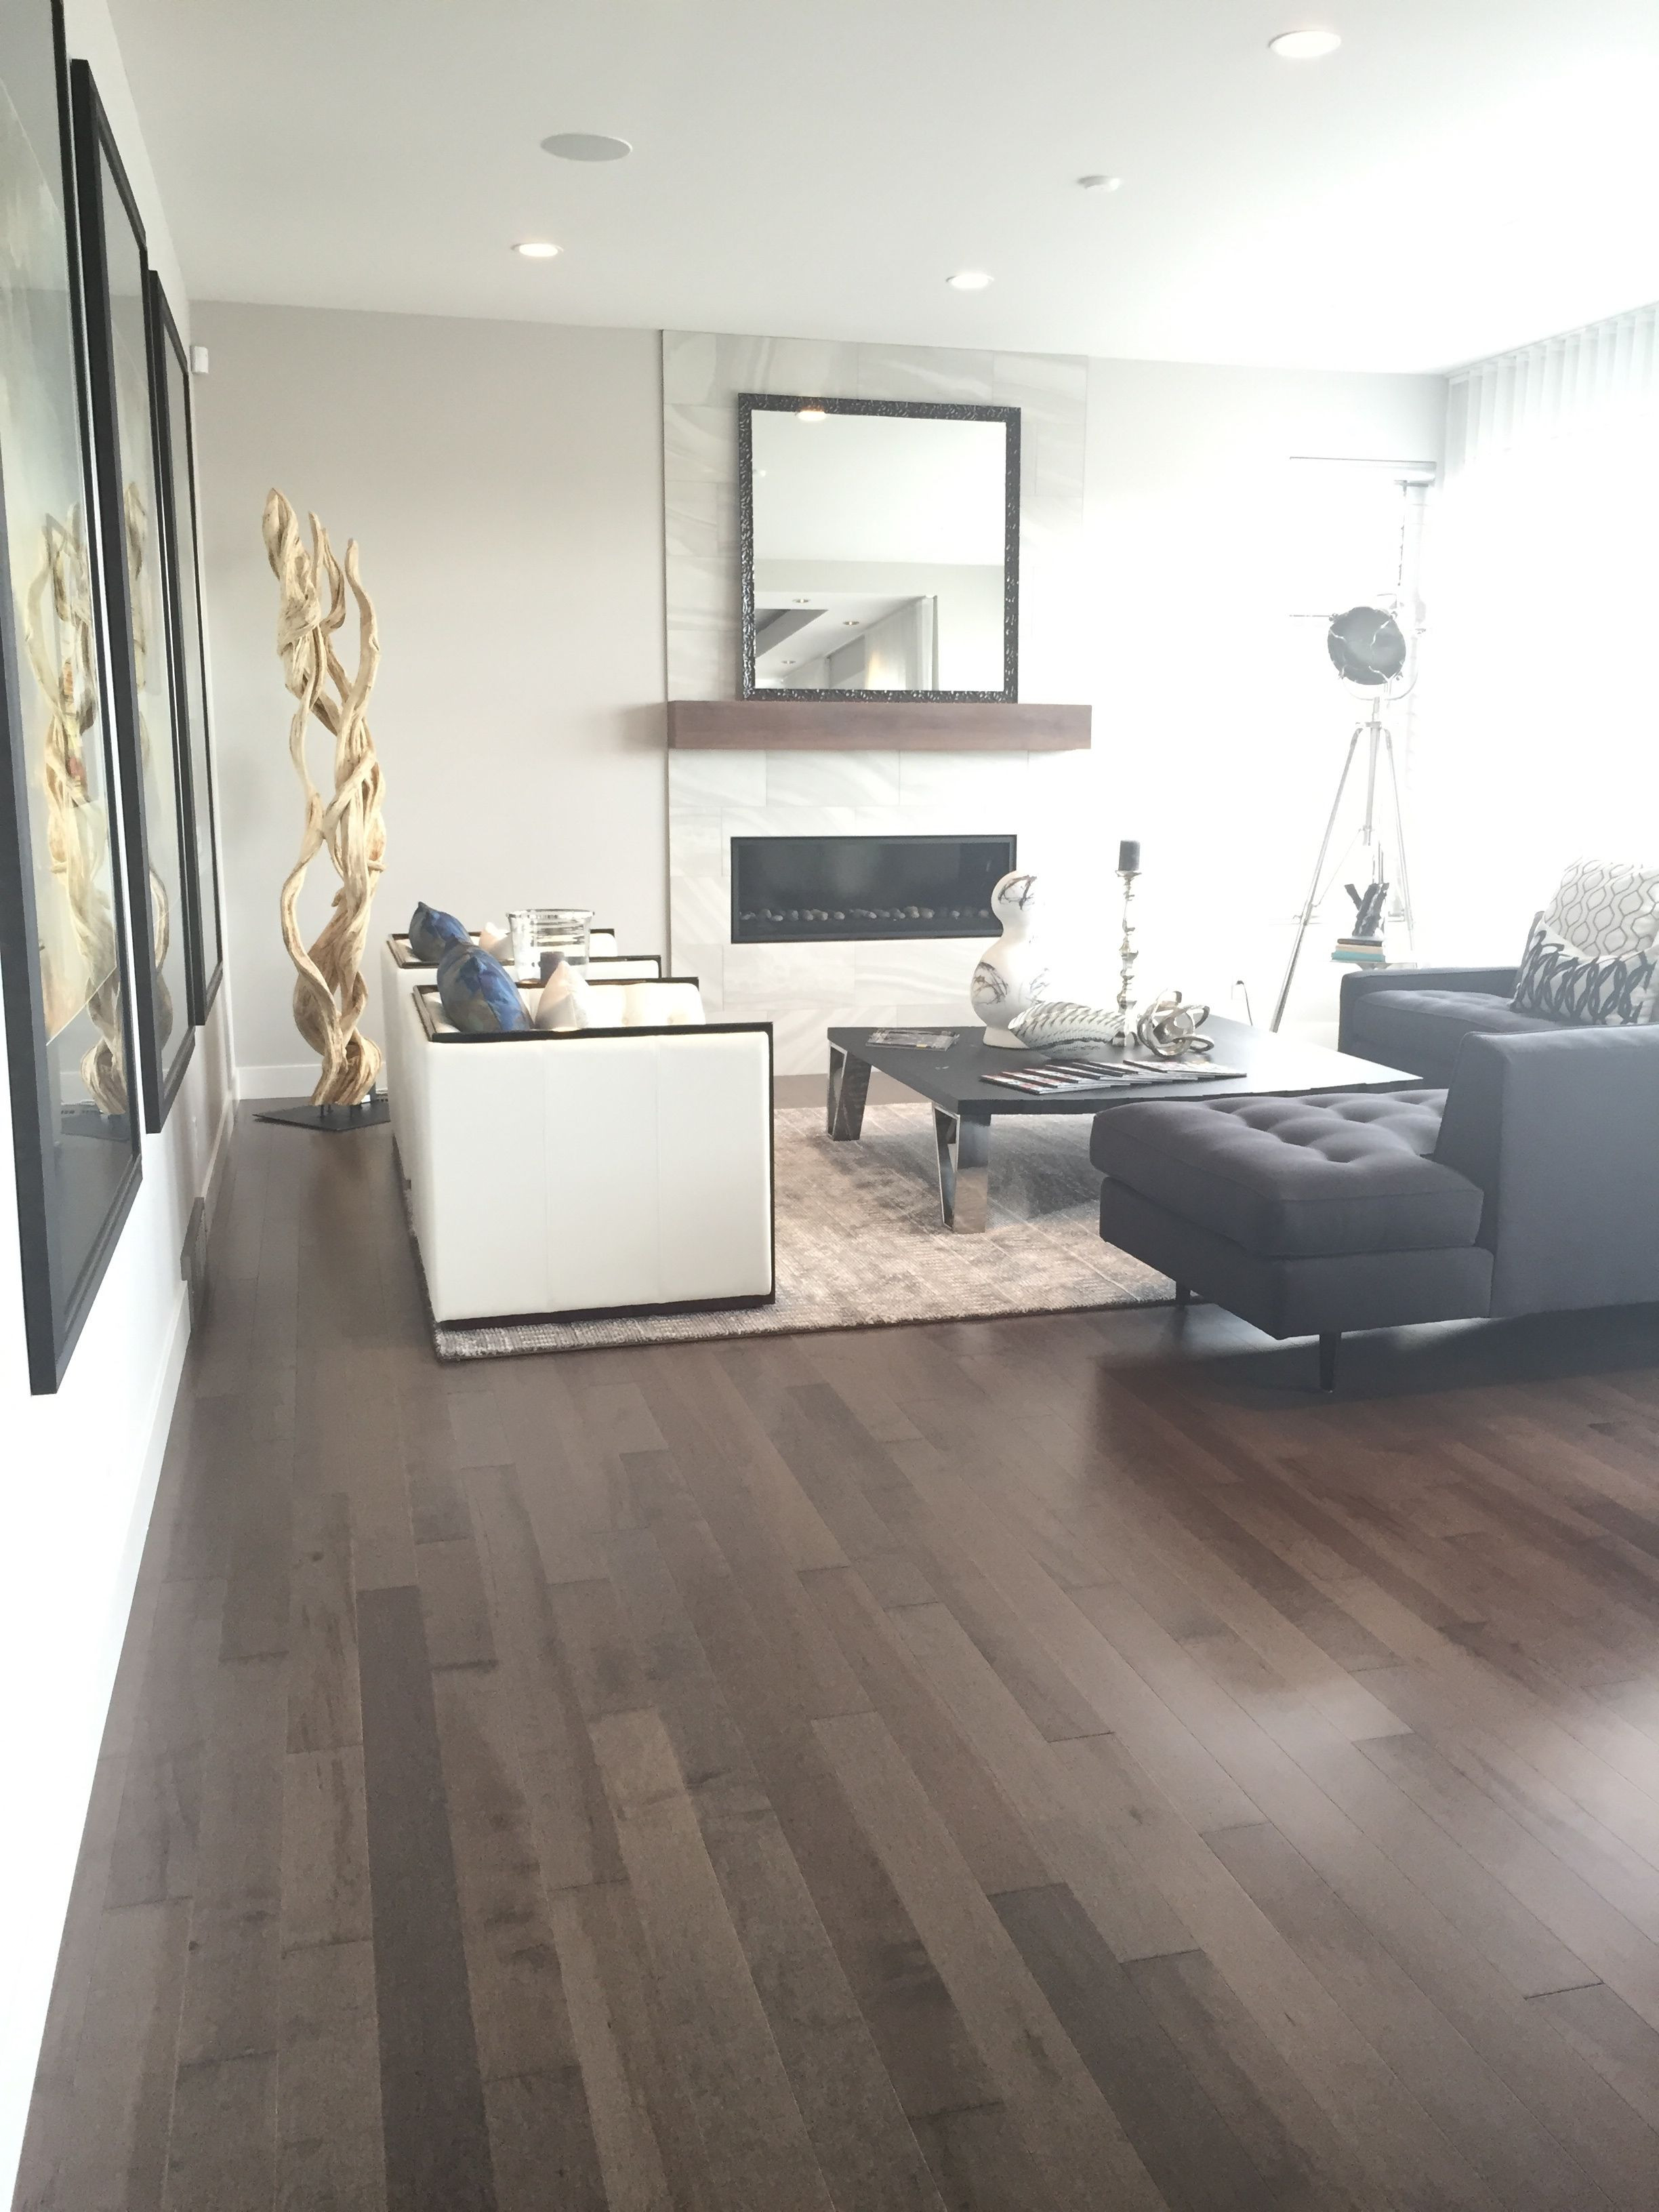 22 Stunning How to Finish An Unfinished Hardwood Floor 2024 free download how to finish an unfinished hardwood floor of smoky grey essential hard maple tradition lauzon hardwood inside beautiful living room from the cantata showhome featuring lauzons smokey grey h